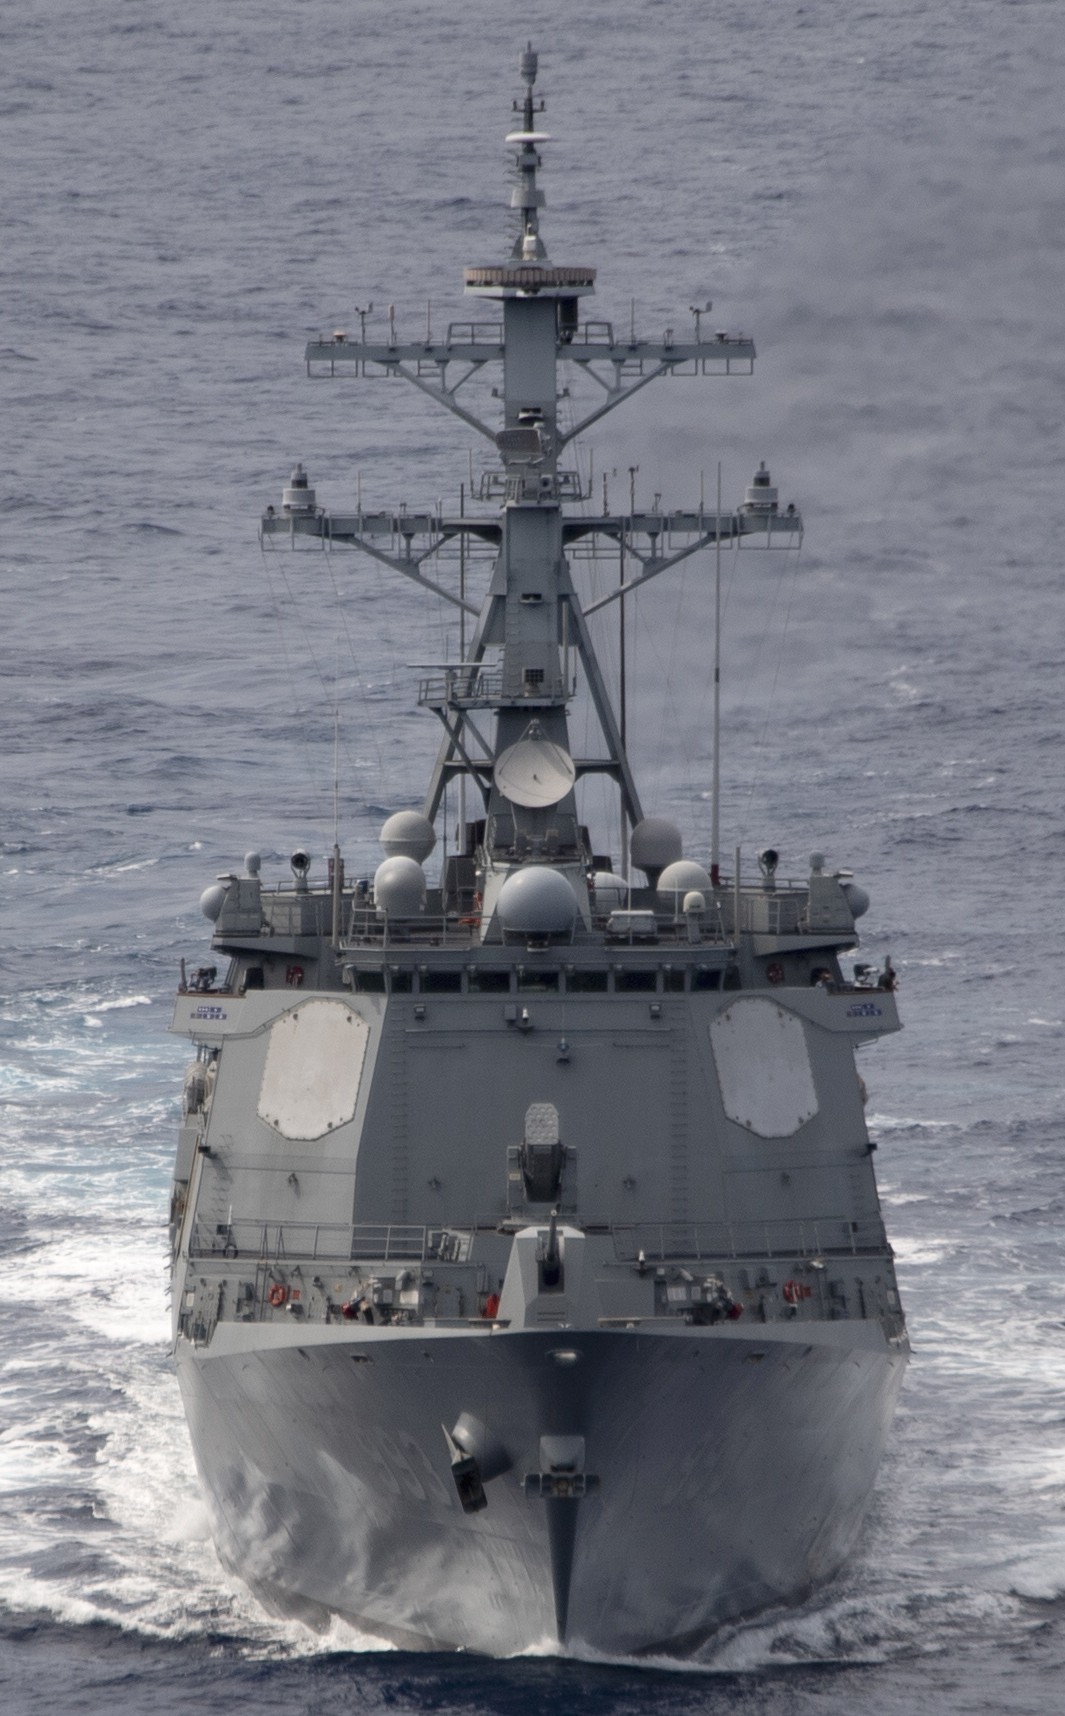 ddg-993 roks seoae ryu seong-ryong sejong the great class guided missile destroyer aegis republic of korea navy rokn 05